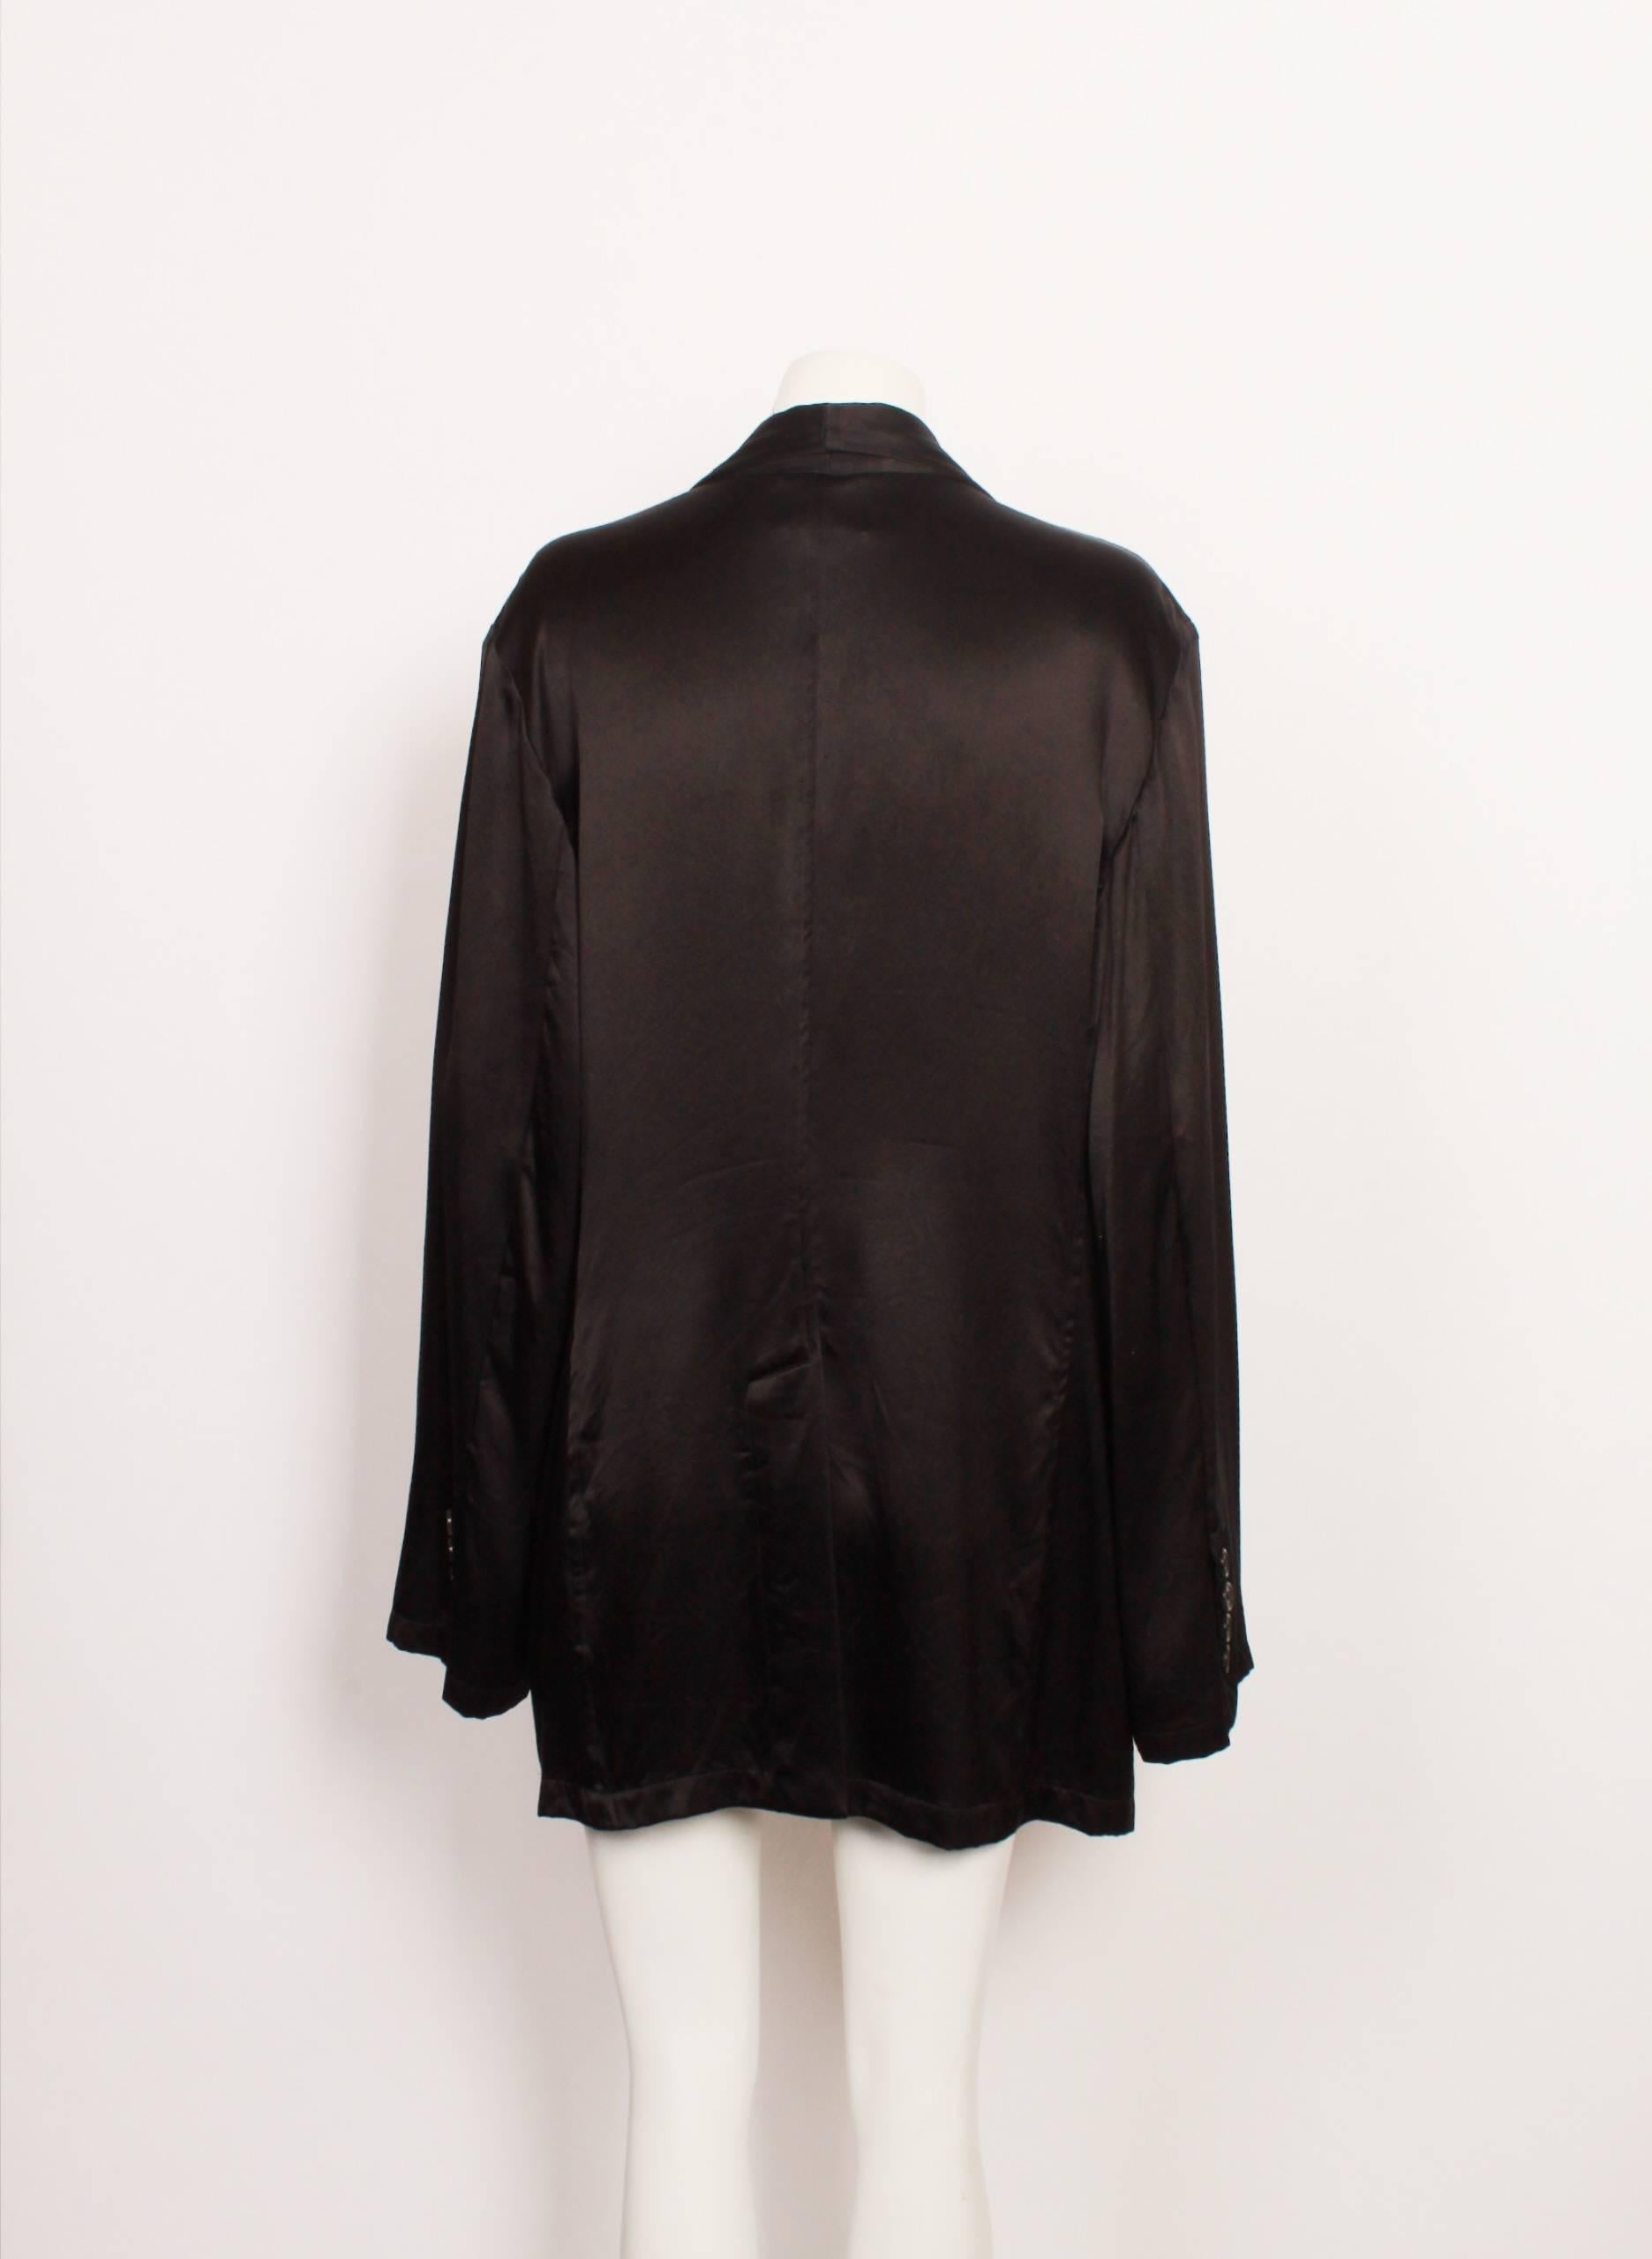 Ann Demeulemeester Jacket In Good Condition In Melbourne, Victoria